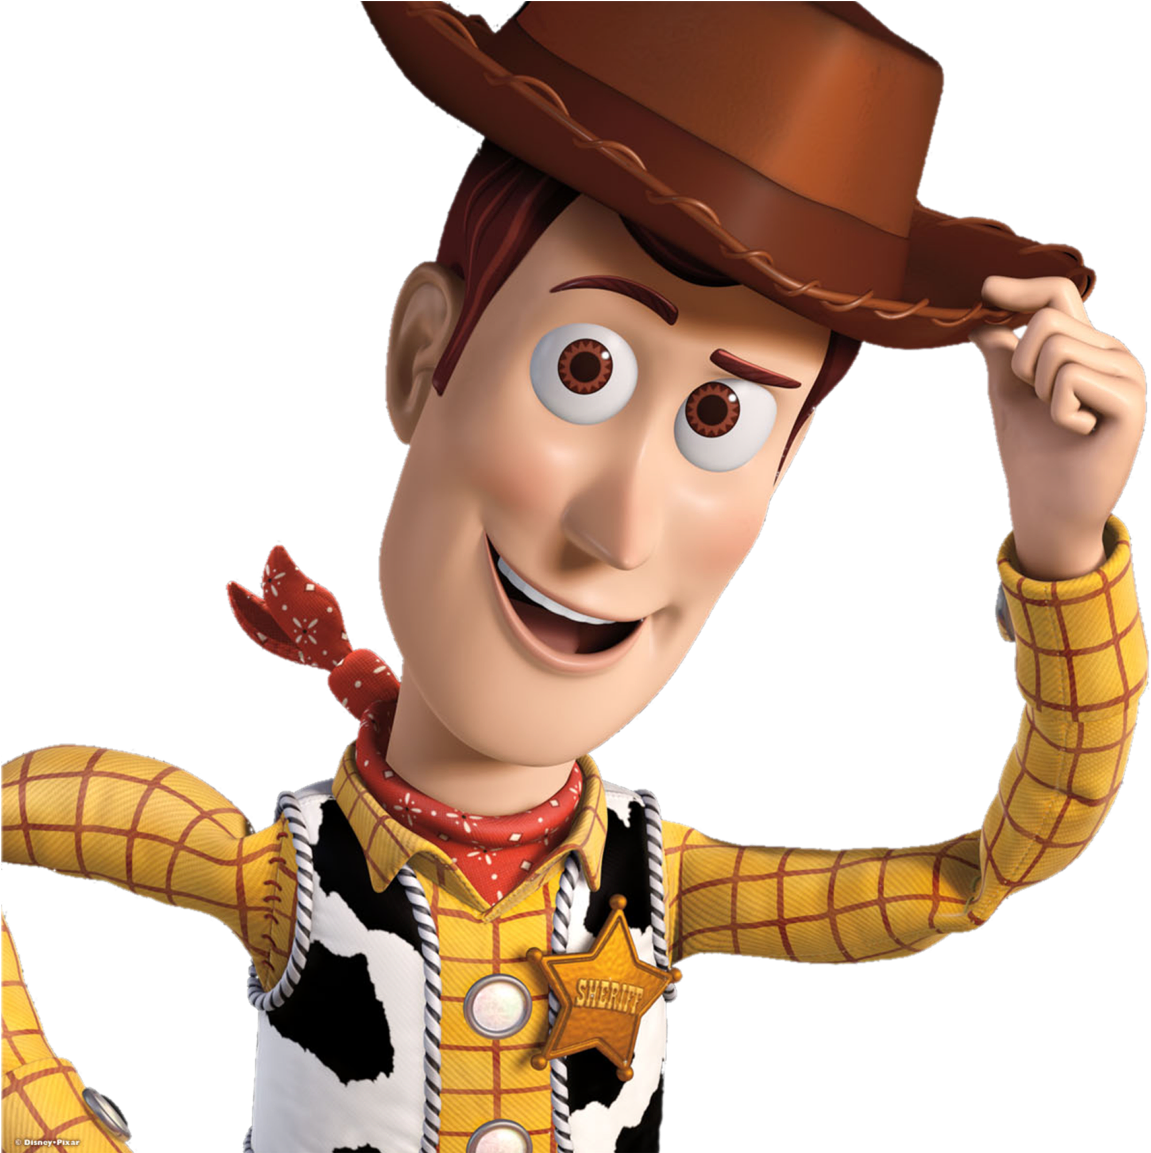 A Cartoon Character With A Cowboy Hat